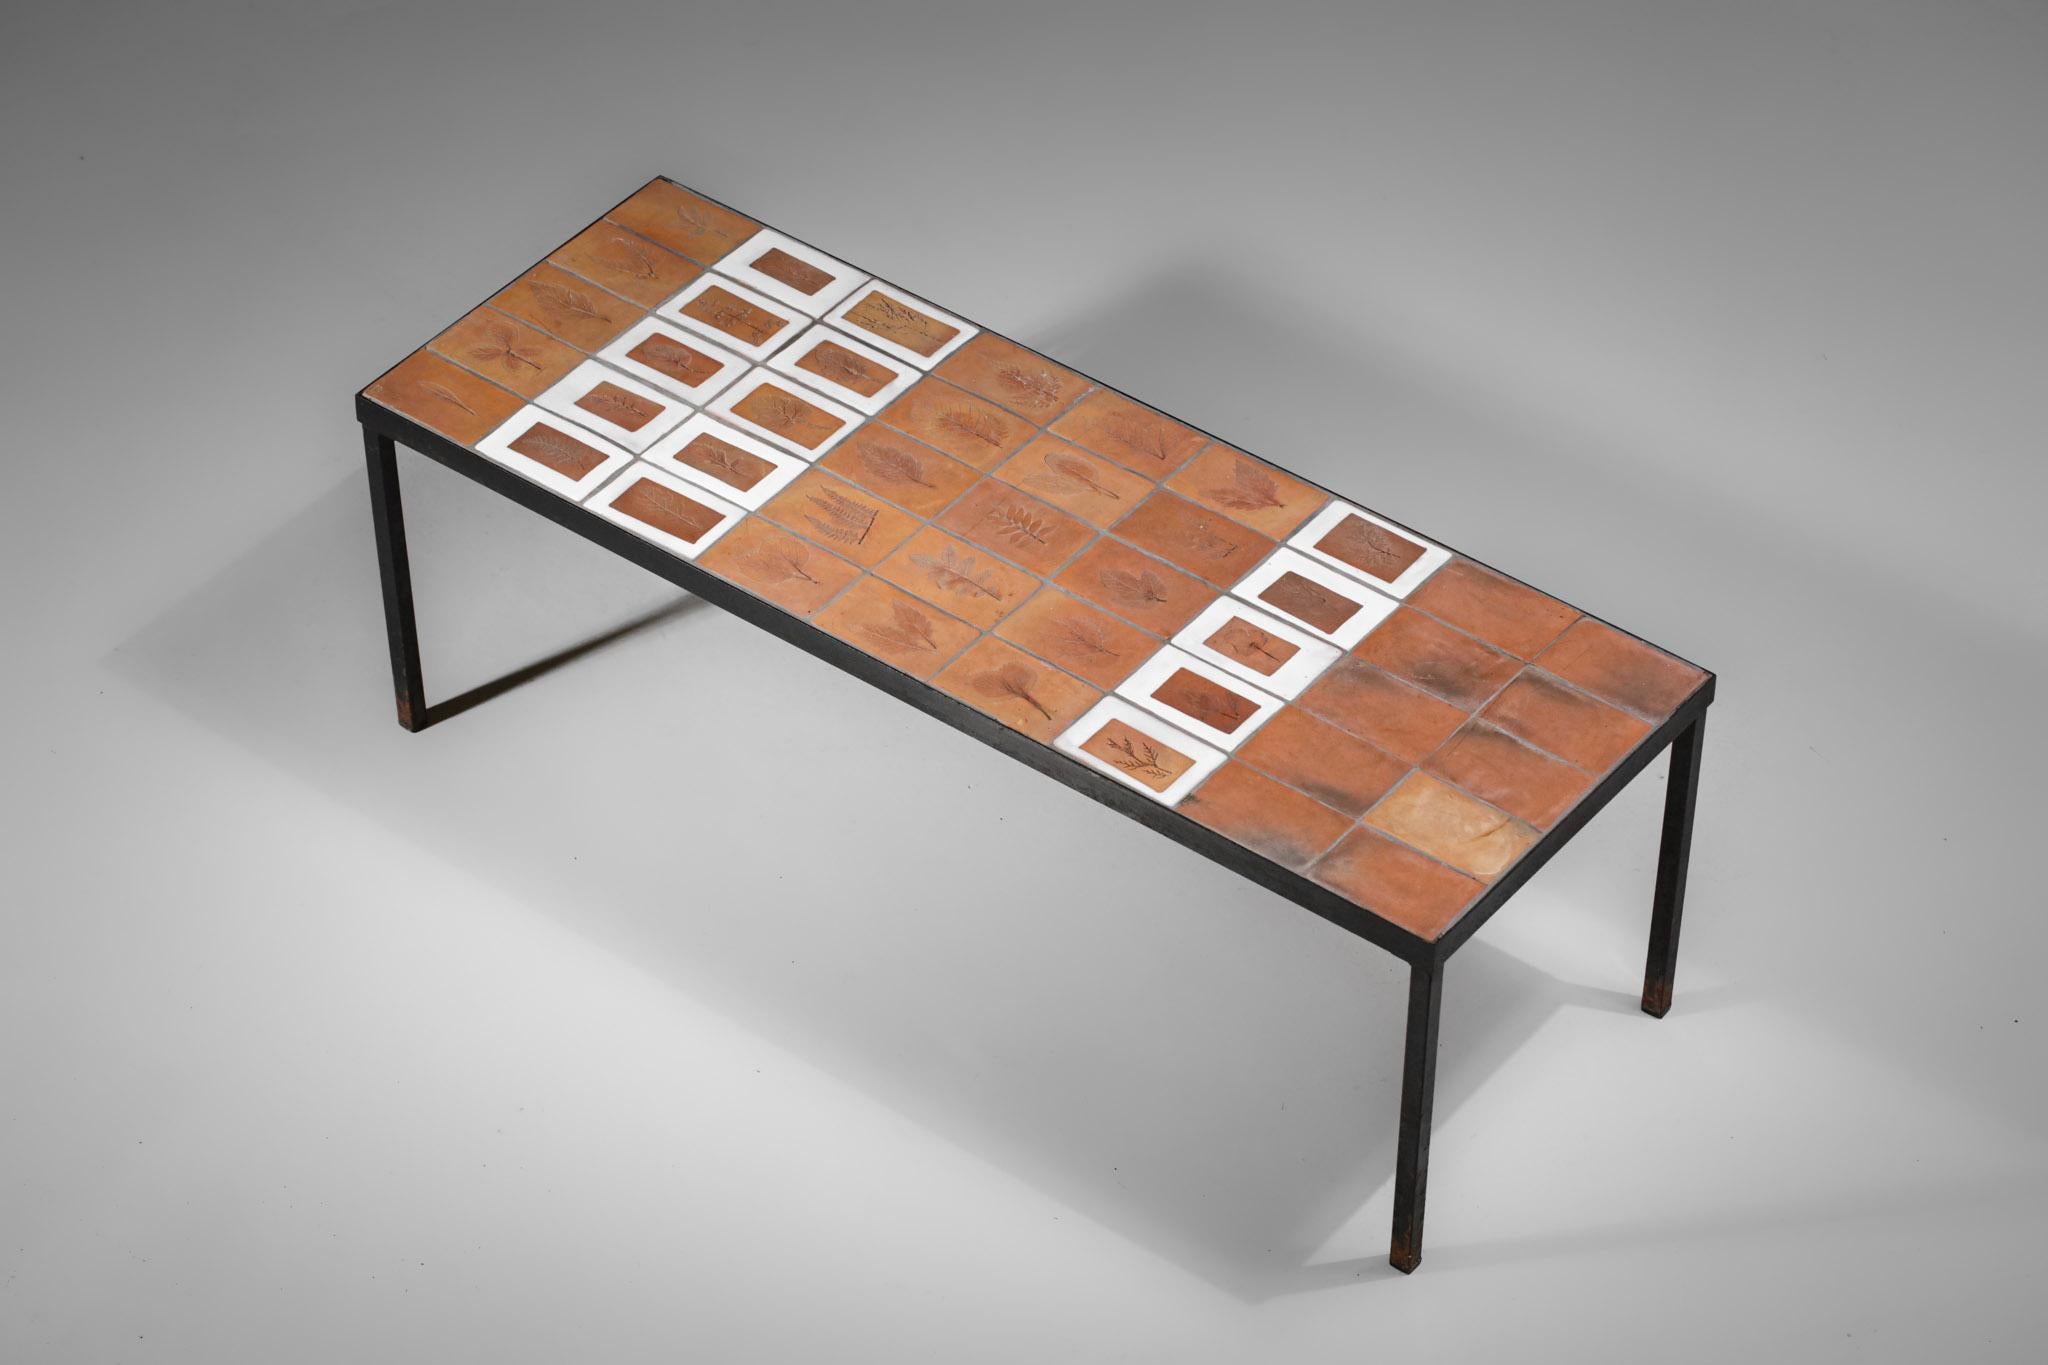 Metal and ceramic coffee table from the 60's by the French ceramist Roger Capron. The top is covered with brown and white glazed ceramic with inlays of the artist's typical 